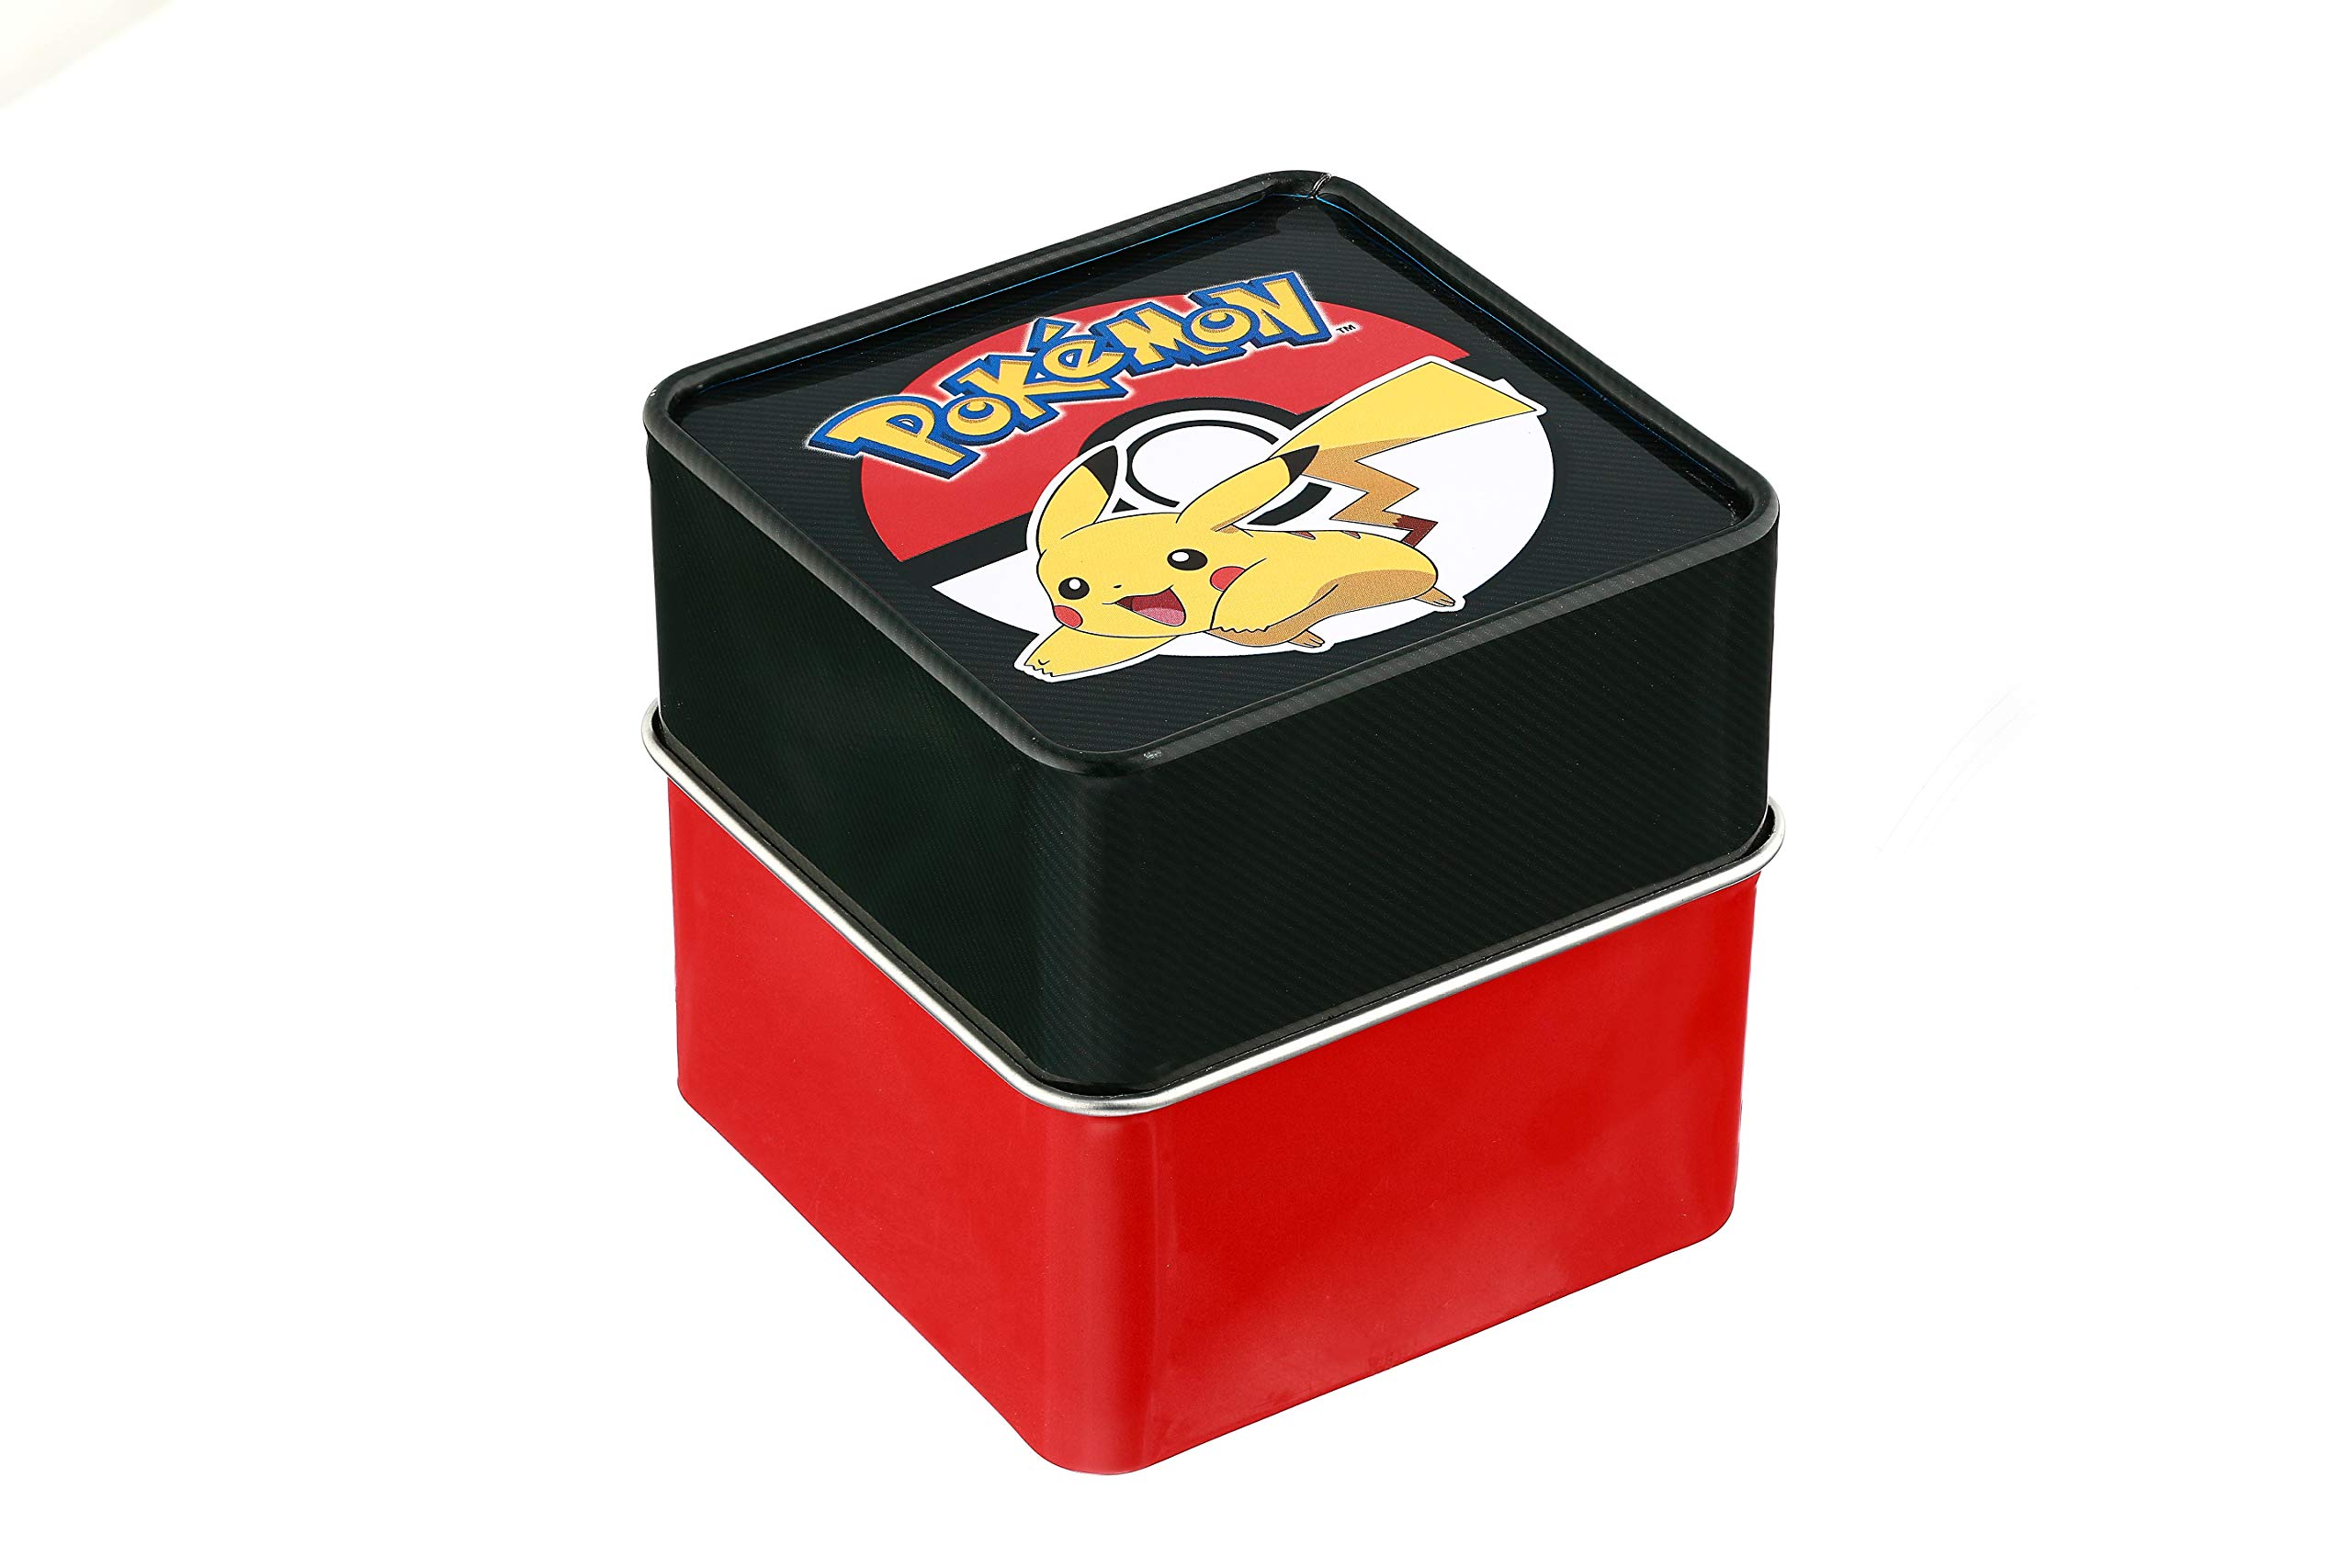 Accutime Kids Pokemon Pikachu Analog Quartz Watch for Boys, Girls, Toddlers and Adults All Ages